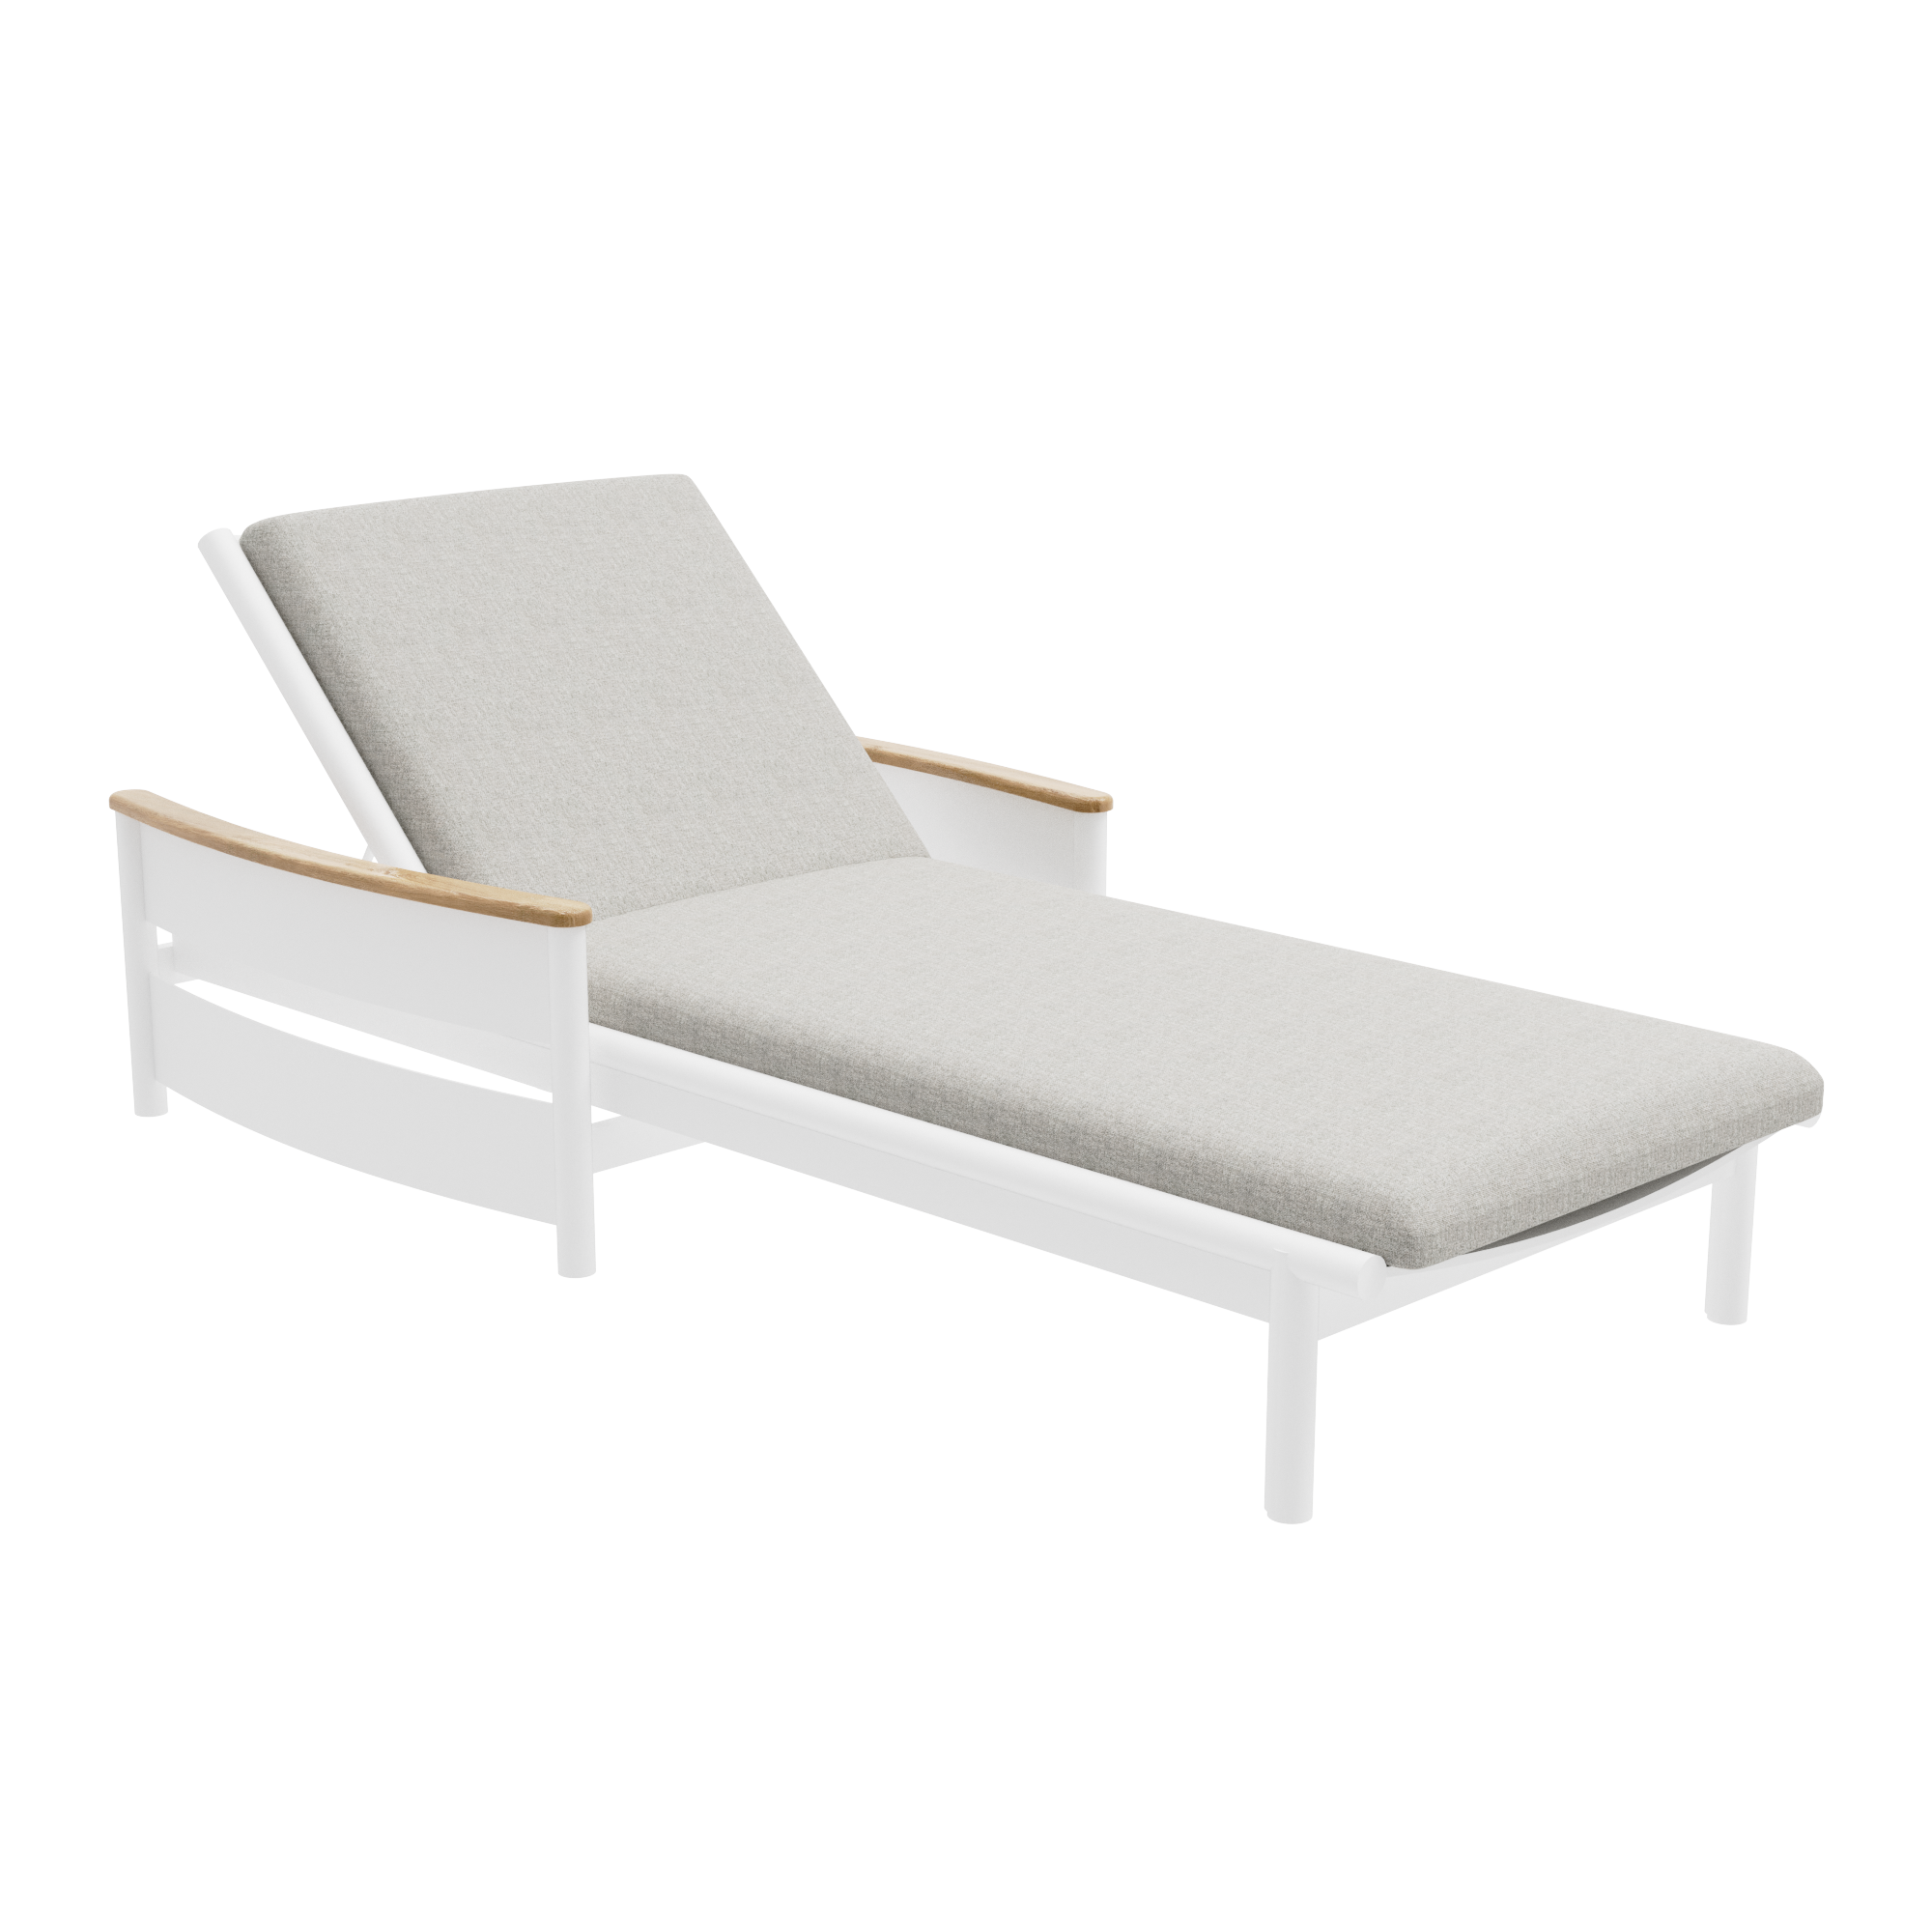 OVIEADO SUNLOUNGER WITH ARM